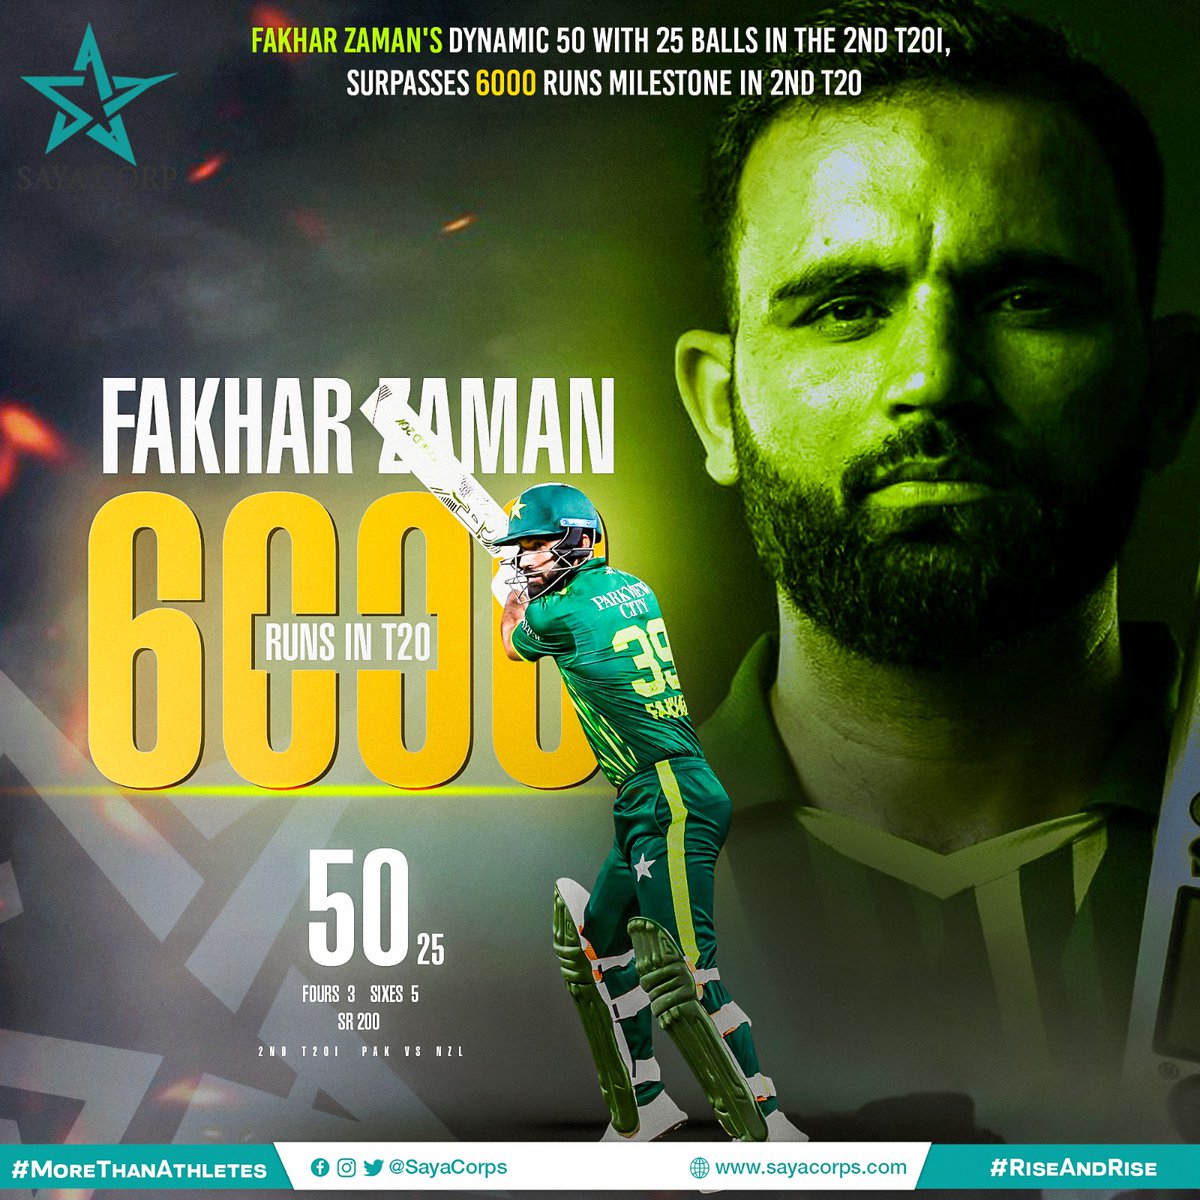 There's no stopping when @FakharZamanLive gets going! 💪🏻 The left hander scored a quick fire 5️⃣0️⃣ that included 5️⃣ huge sixes in the 2nd T20I. He scored his 9️⃣th T20I half century and also completed 6️⃣0️⃣0️⃣0️⃣ T20 runs, becoming only the 7️⃣th batter from 🇵🇰 to the milestone.